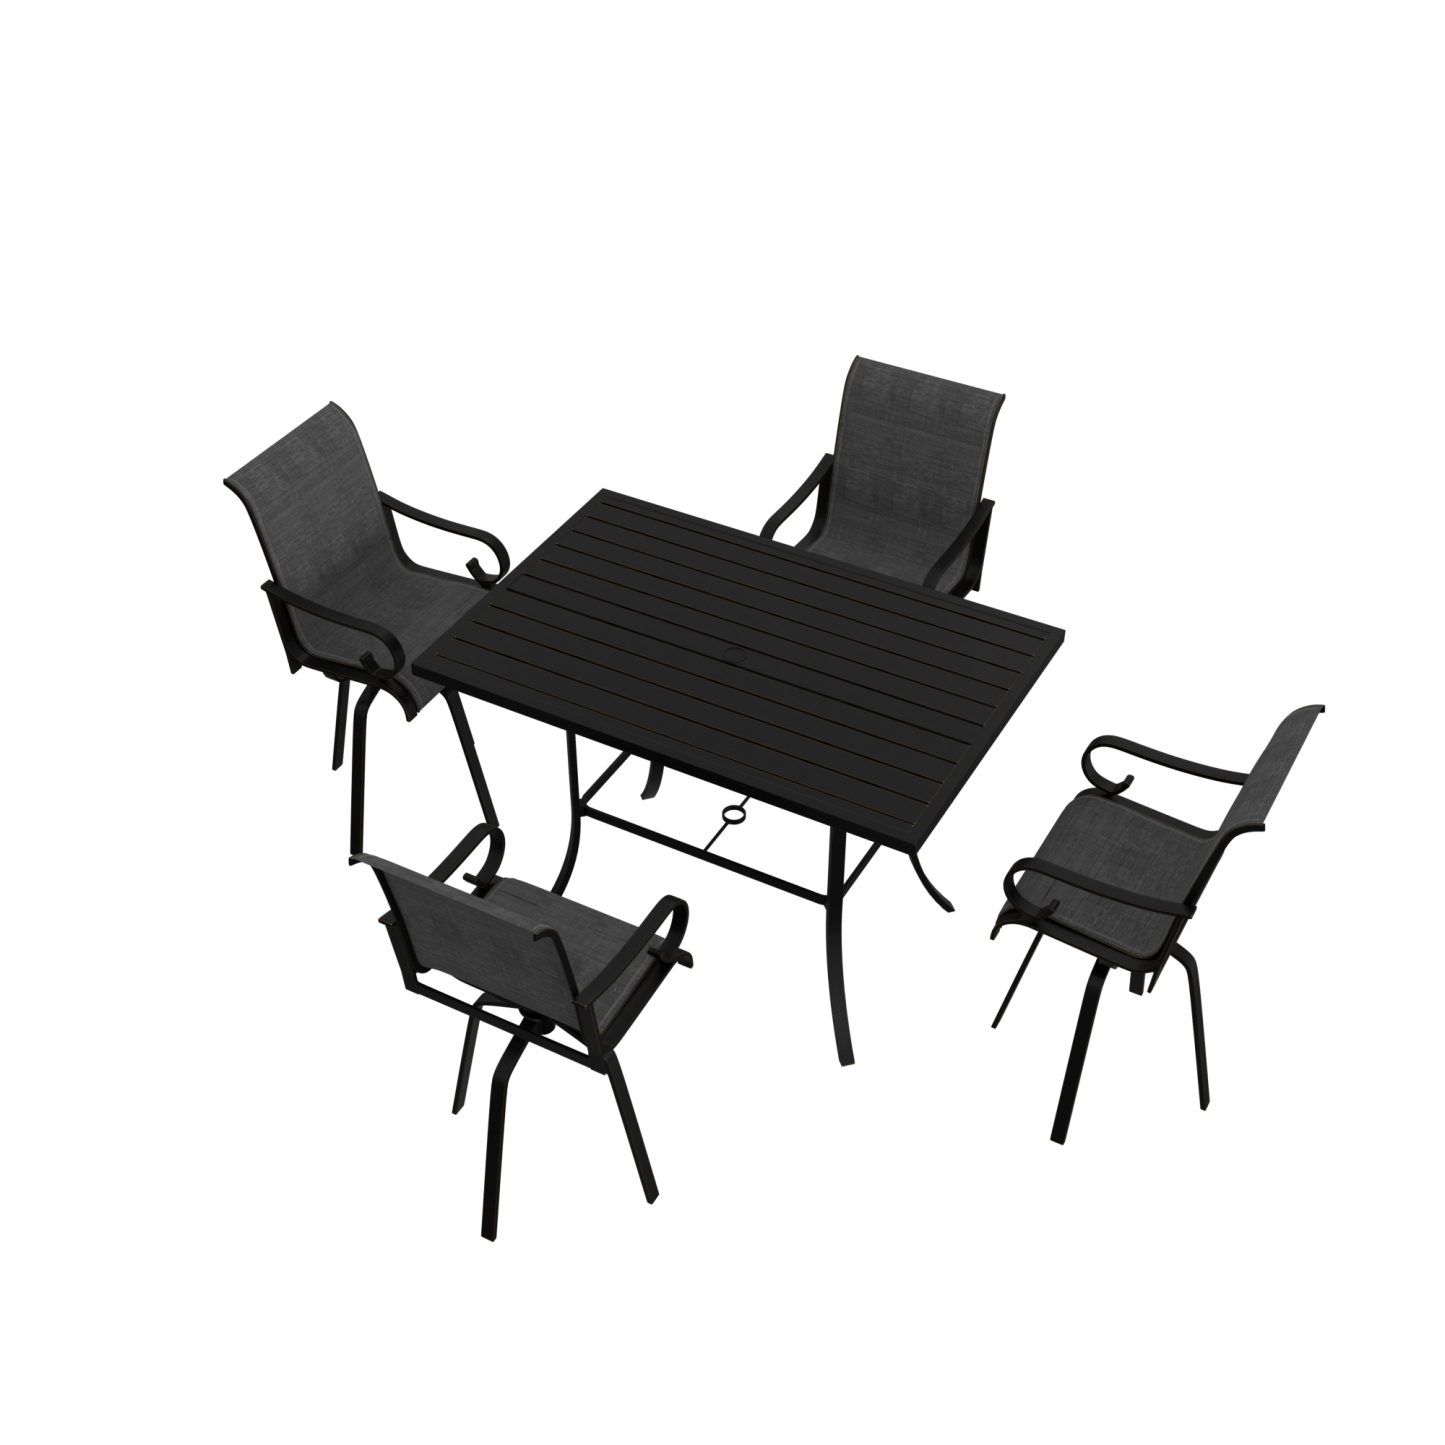 Mondawe 5-Piece Dining Set Outdoor Patio Cast Aluminum Swivel Chair with Table in Black-Mondawe